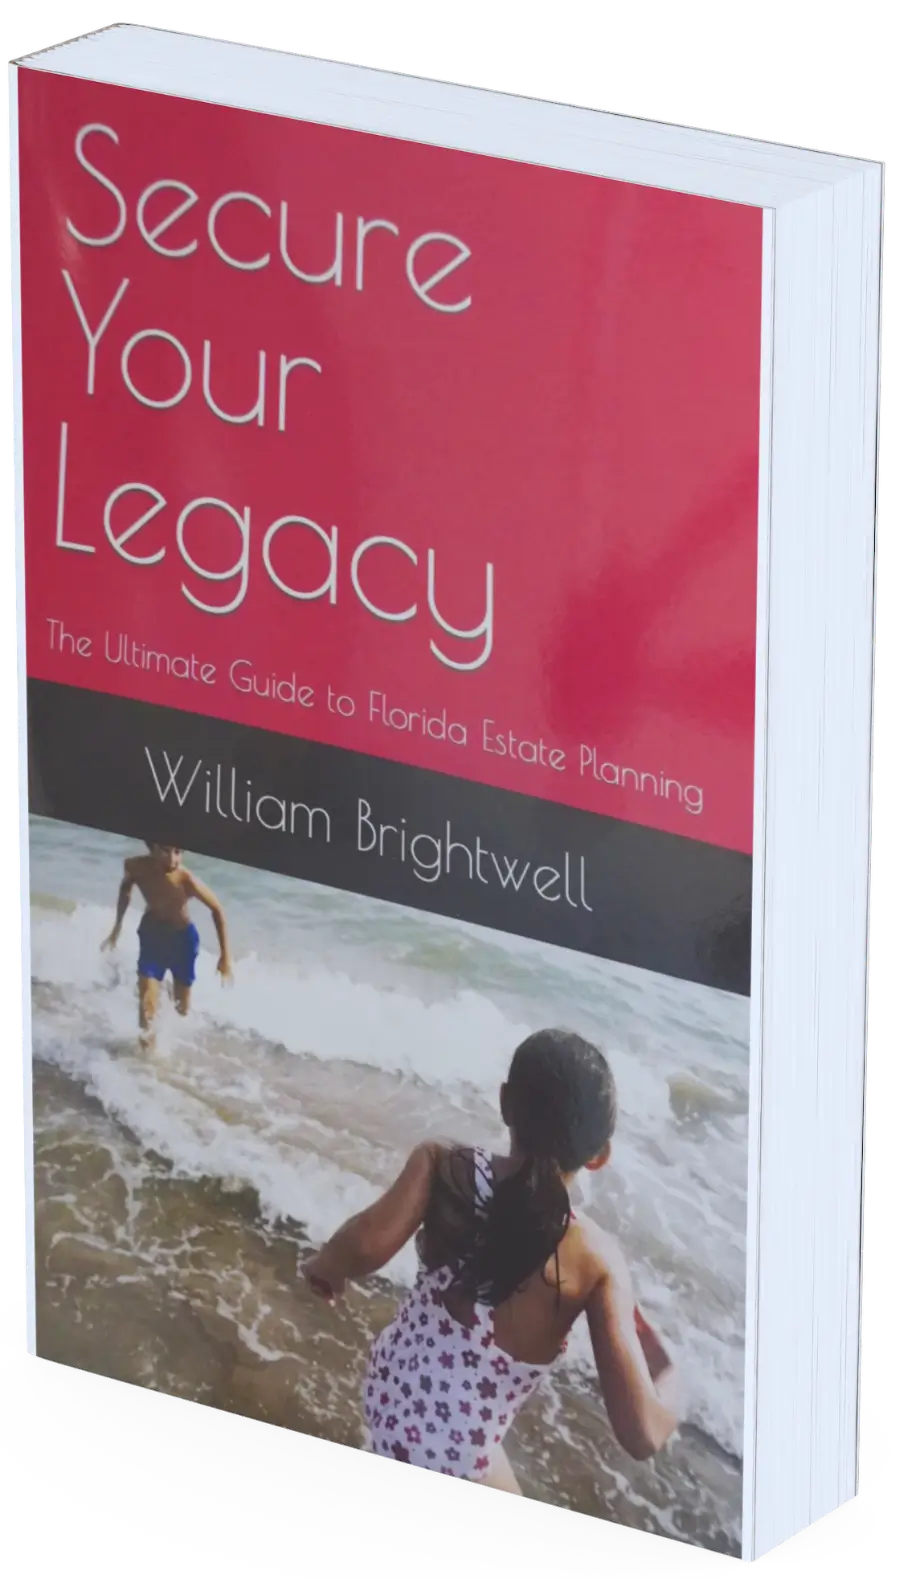 Secure Your Legacy-The Ultimate Guide to Florida Estate Planning